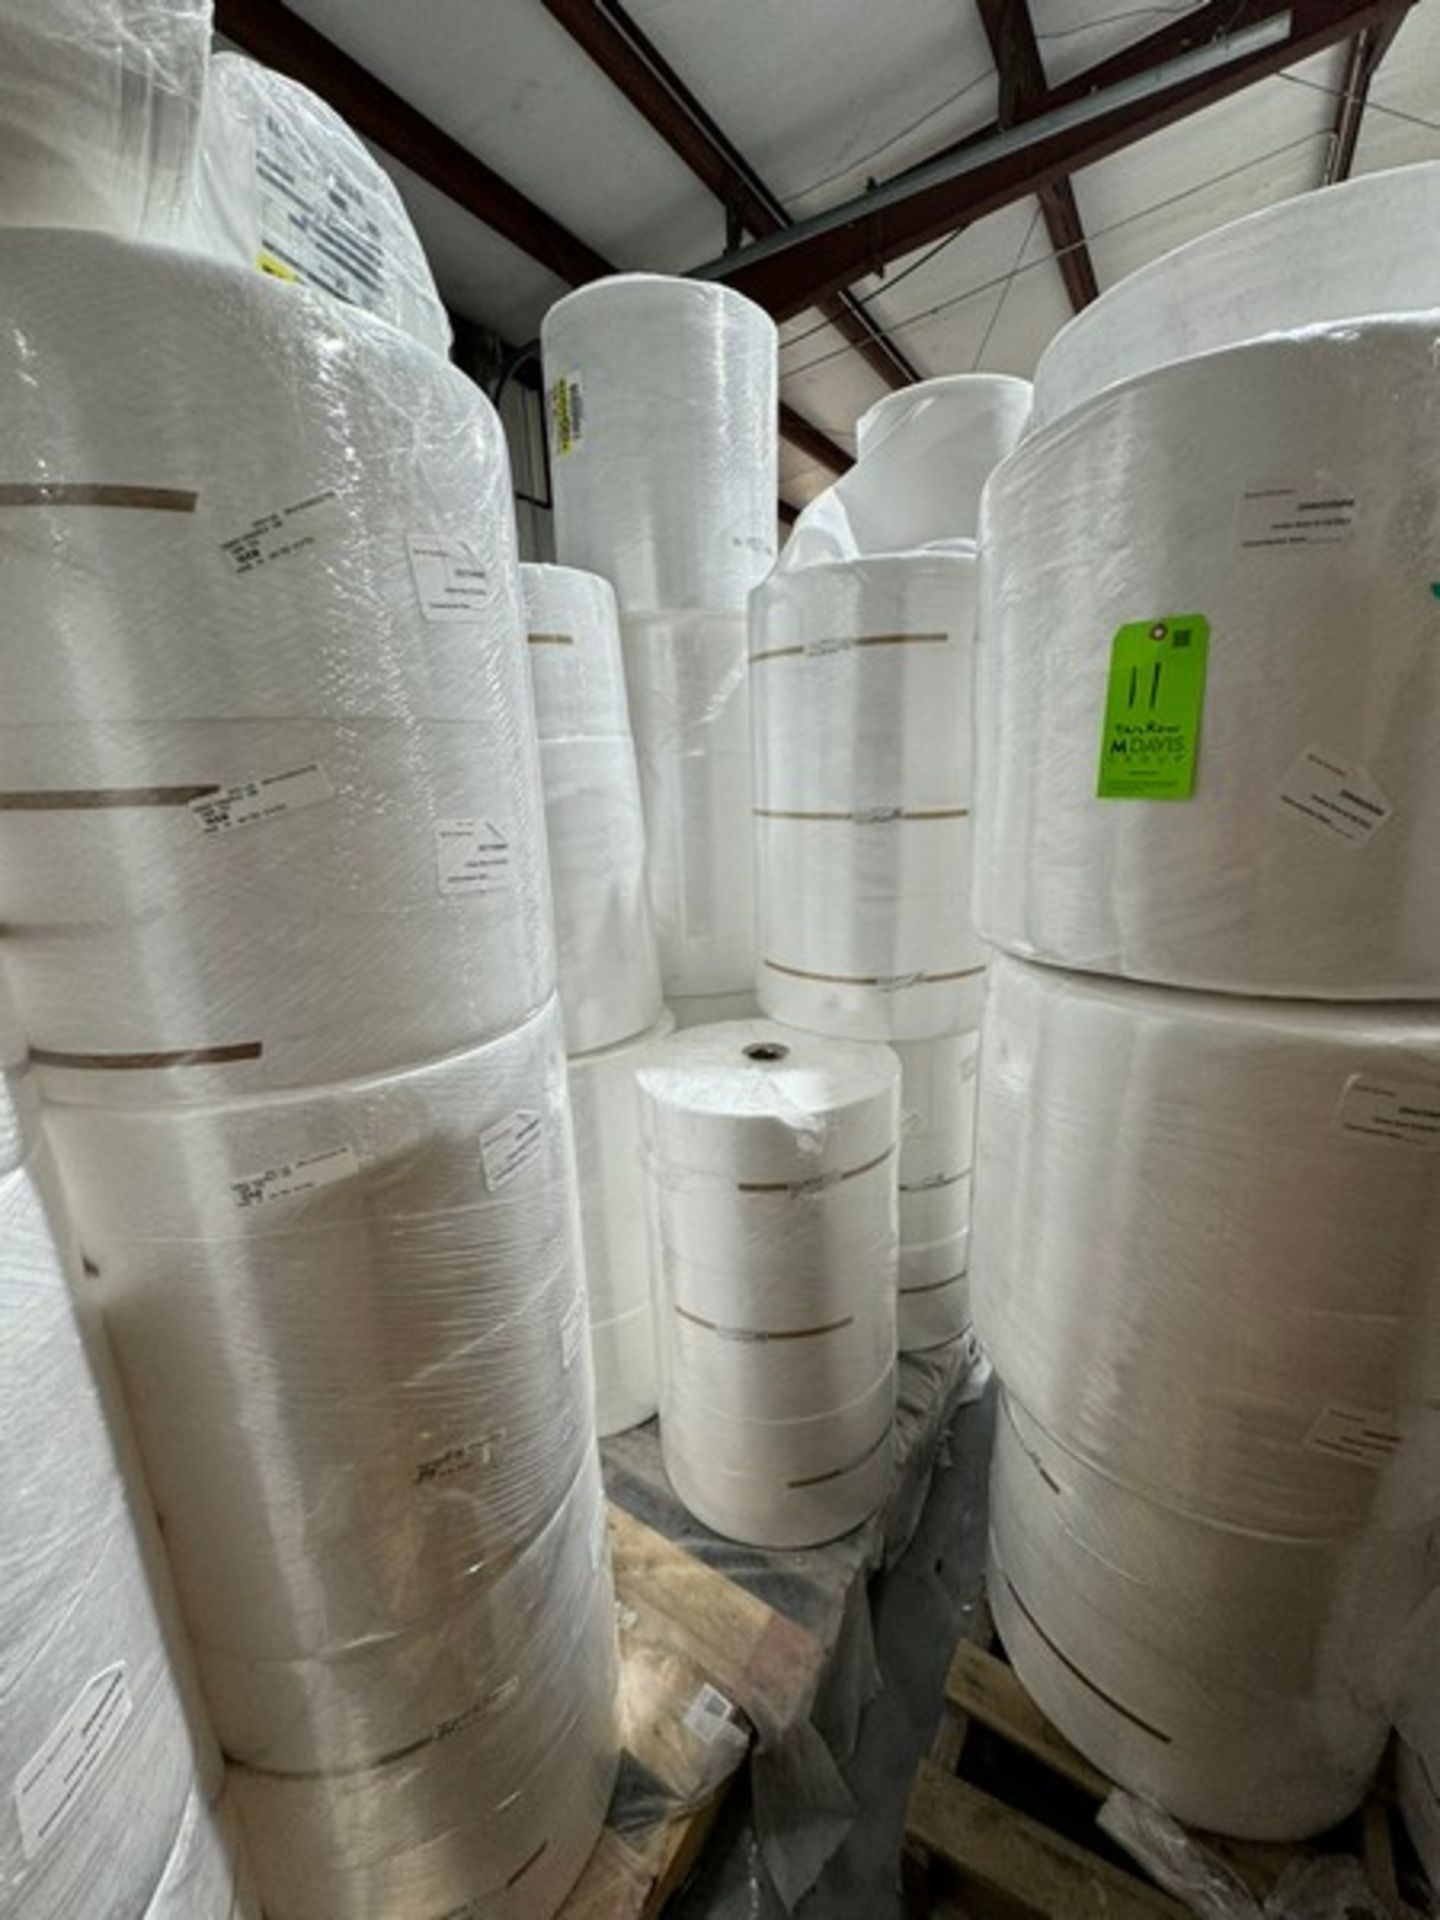 (96) Rolls of NEW Spun Bond, On 4-Pallets (LOCATED IN MOUNT HOME, AR) - Image 2 of 3